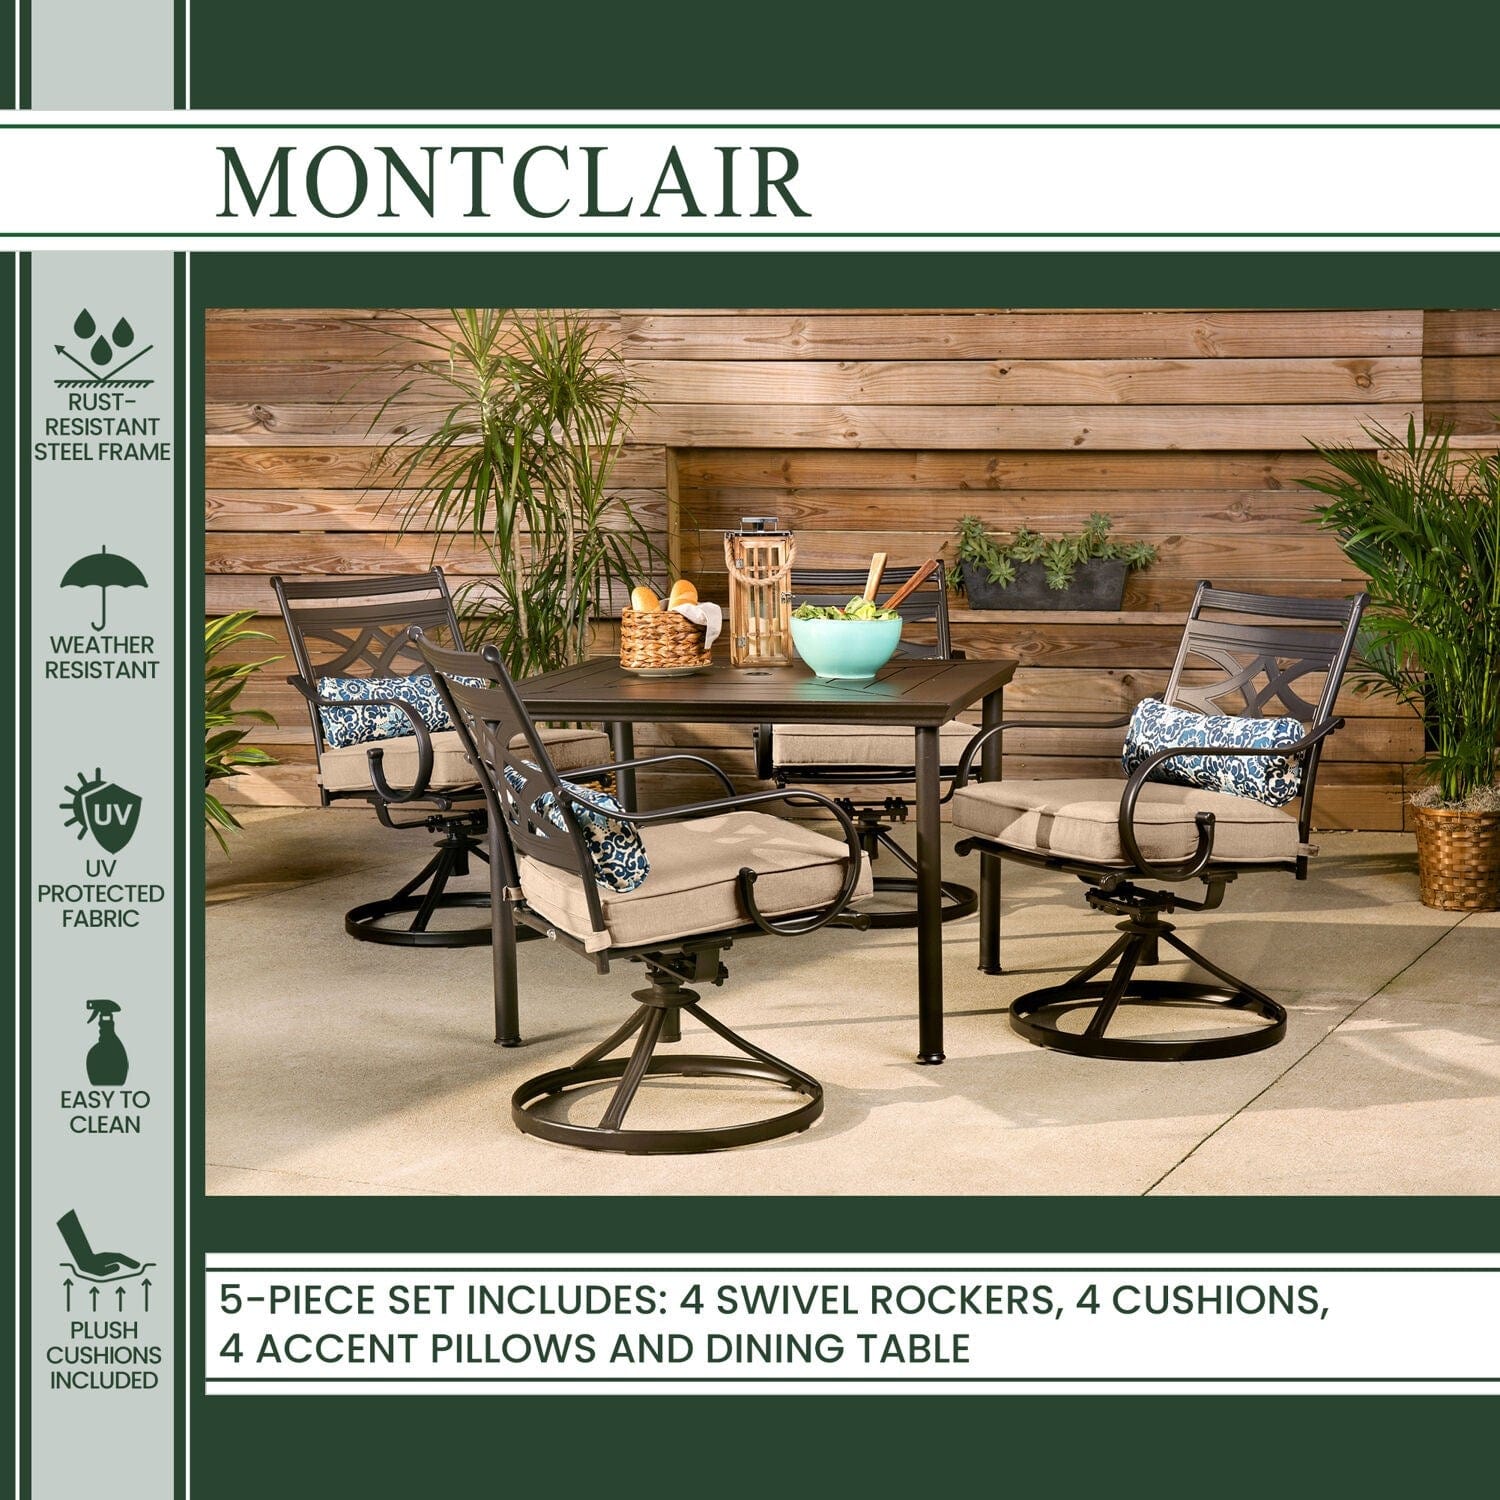 Hanover Outdoor Dining Set Hanover Montclair 5-Piece Patio Dining Set in Country Cork with 4 Swivel Rockers and a 40-Inch Square Table